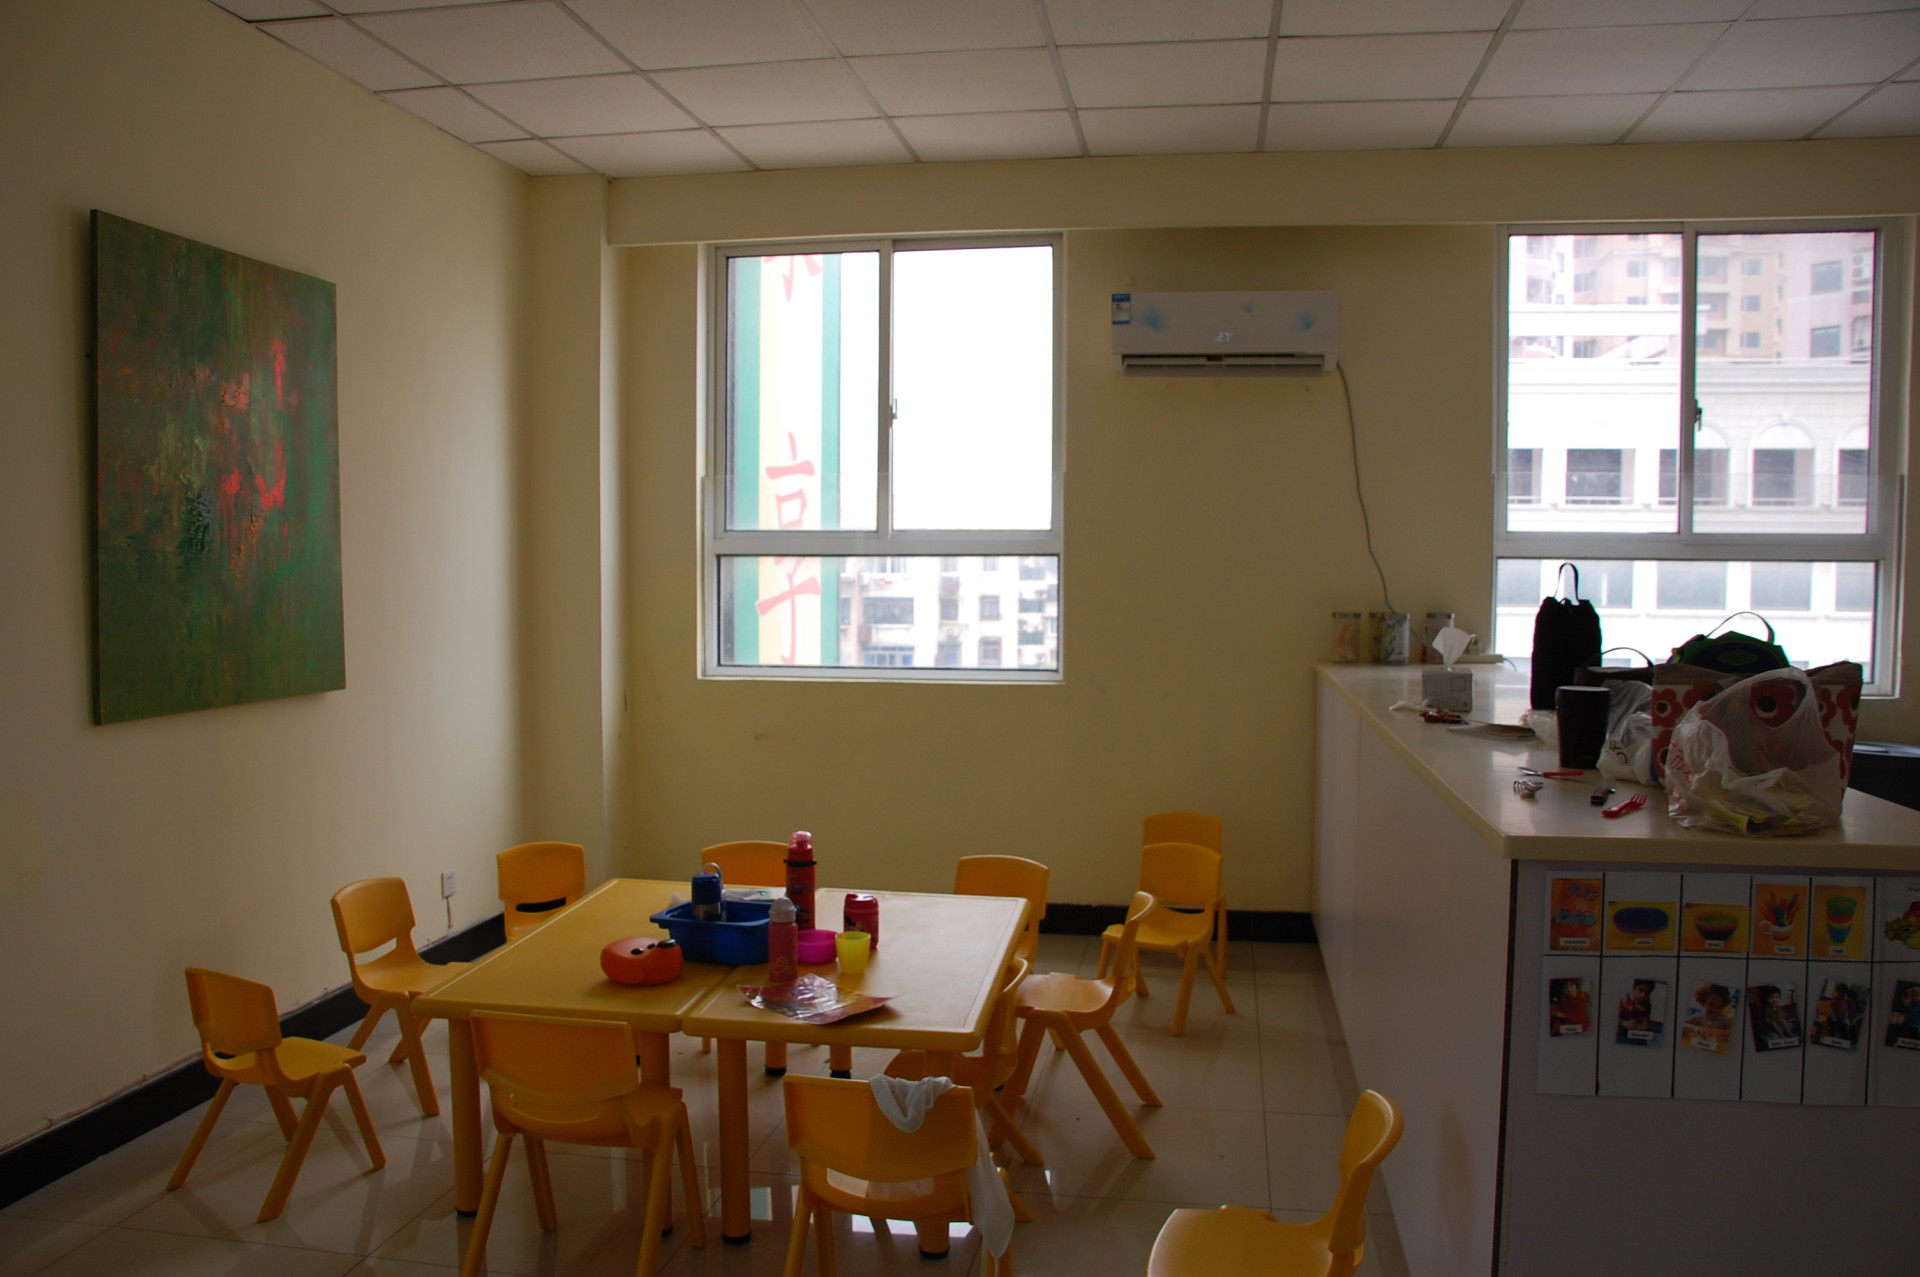 Almost lunch time! Our Lujiazui Campus kitchen and dining area.